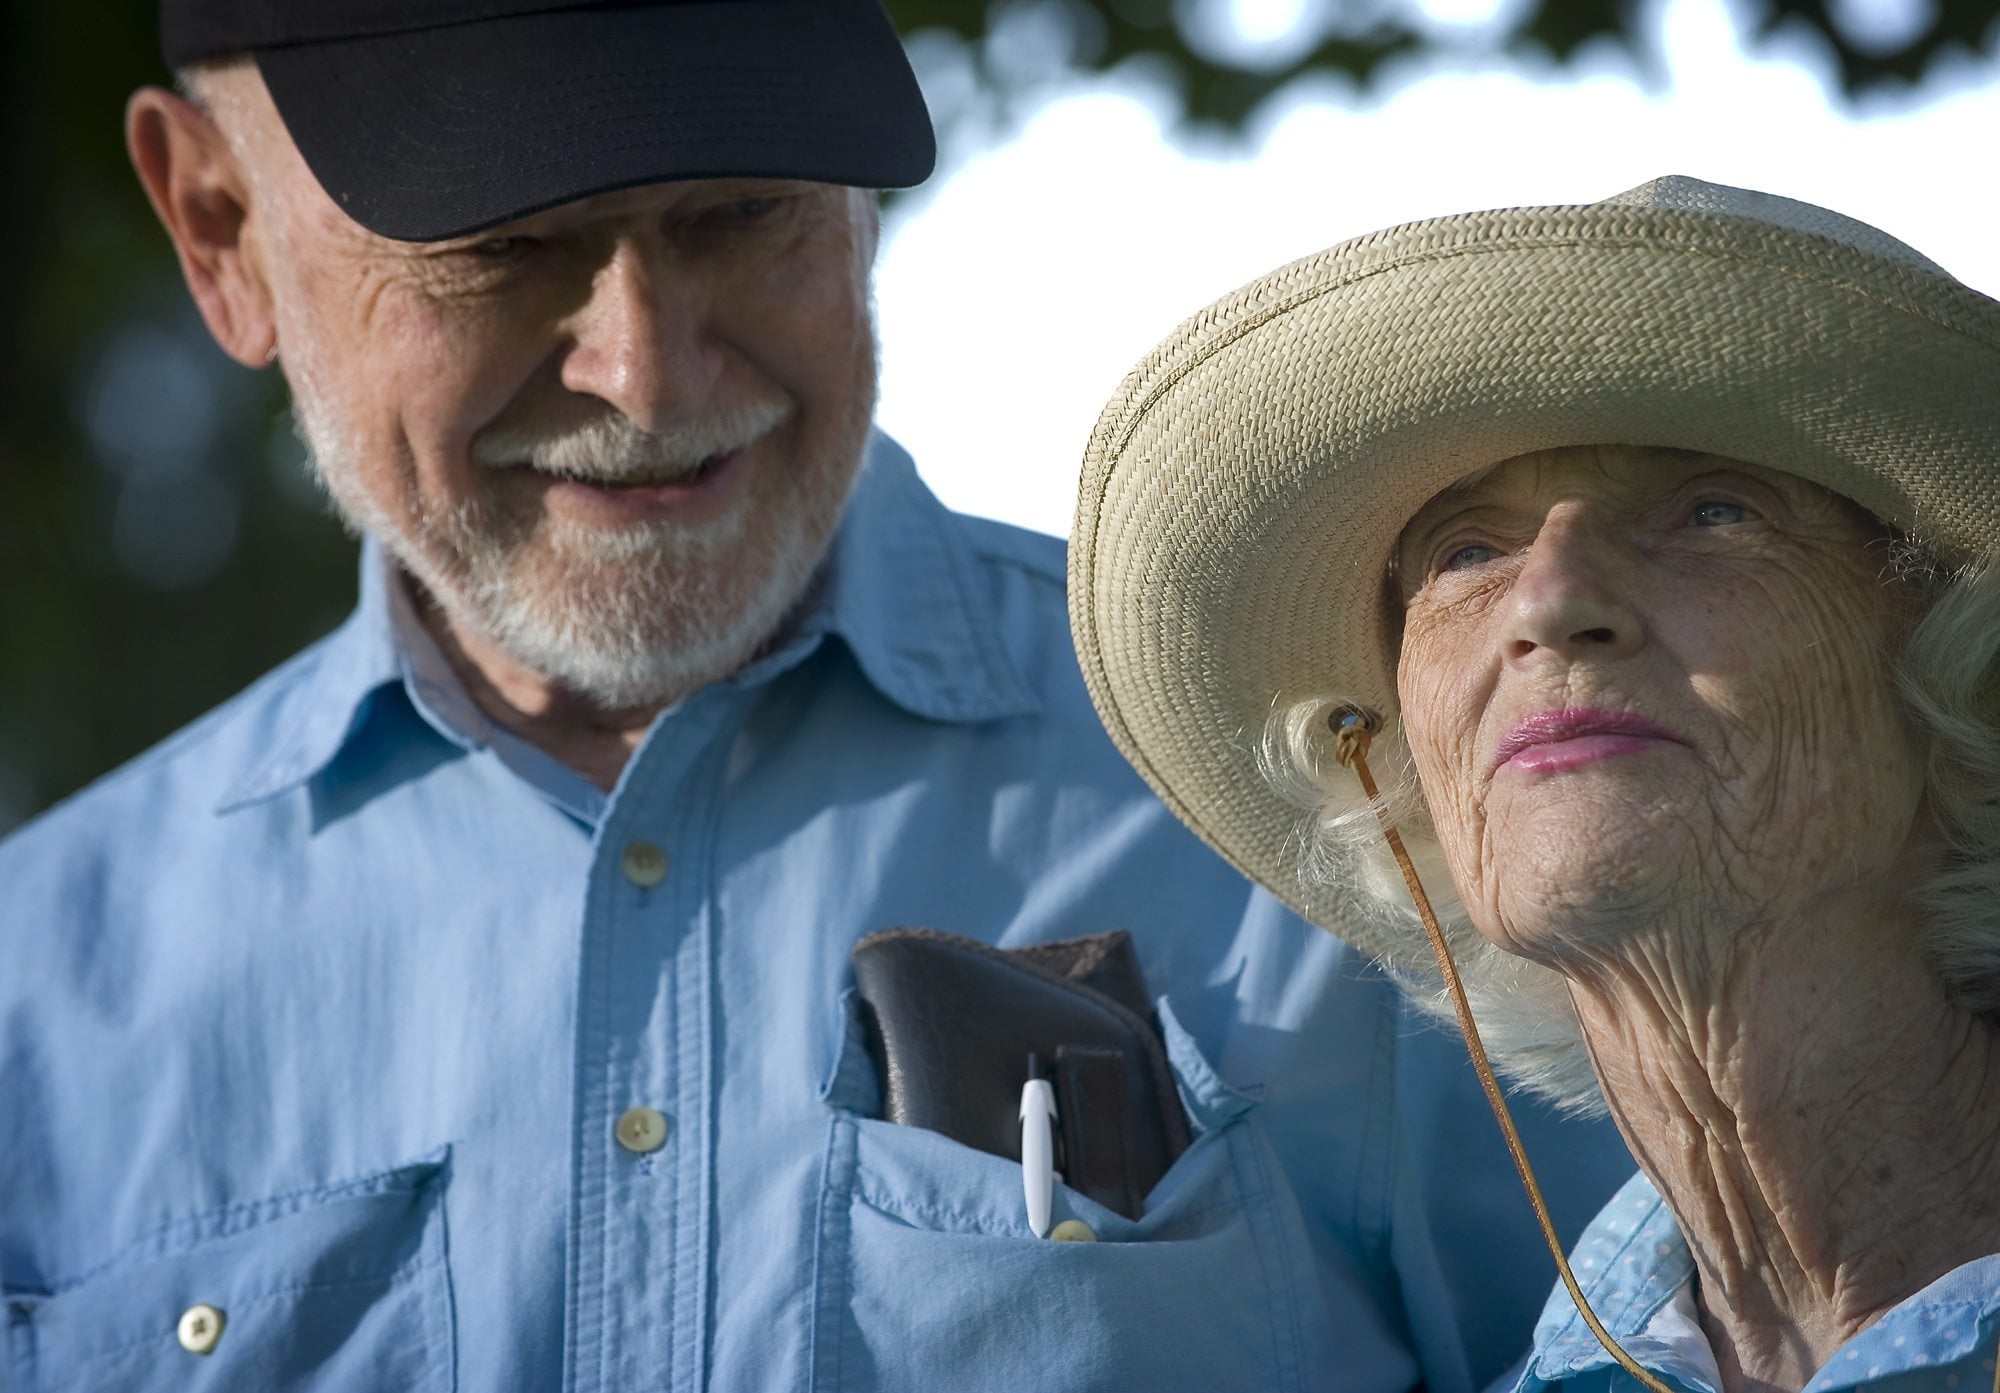 Virg Birdsall, left, admires his wife, Jean, right, before heading off on their daily stroll through Vancouver's H.B. Fuller Park Sept. 9.